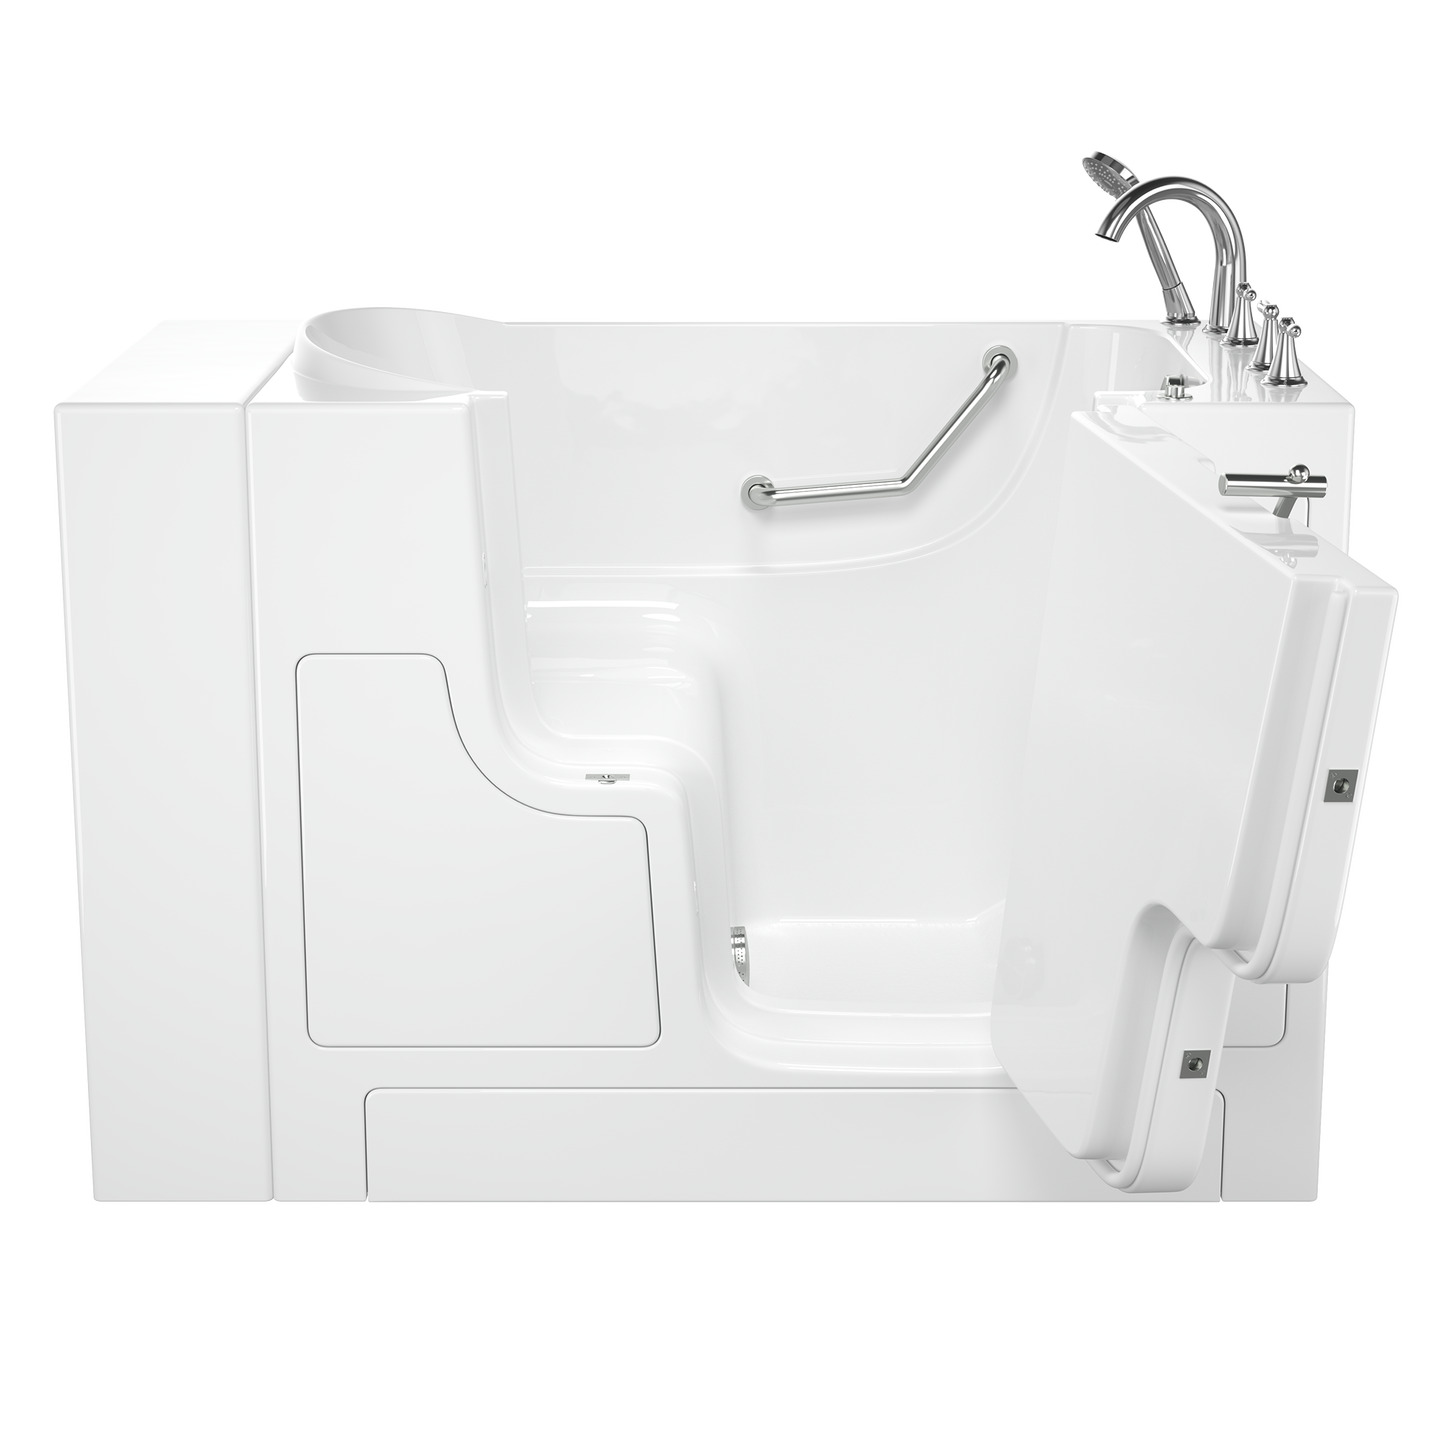 AMERICAN-STANDARD SS9OD5230RS-WH-PC, Gelcoat Premium Series 30 in. x 52 in. Outward Opening Door Walk-In Bathtub in Wib White